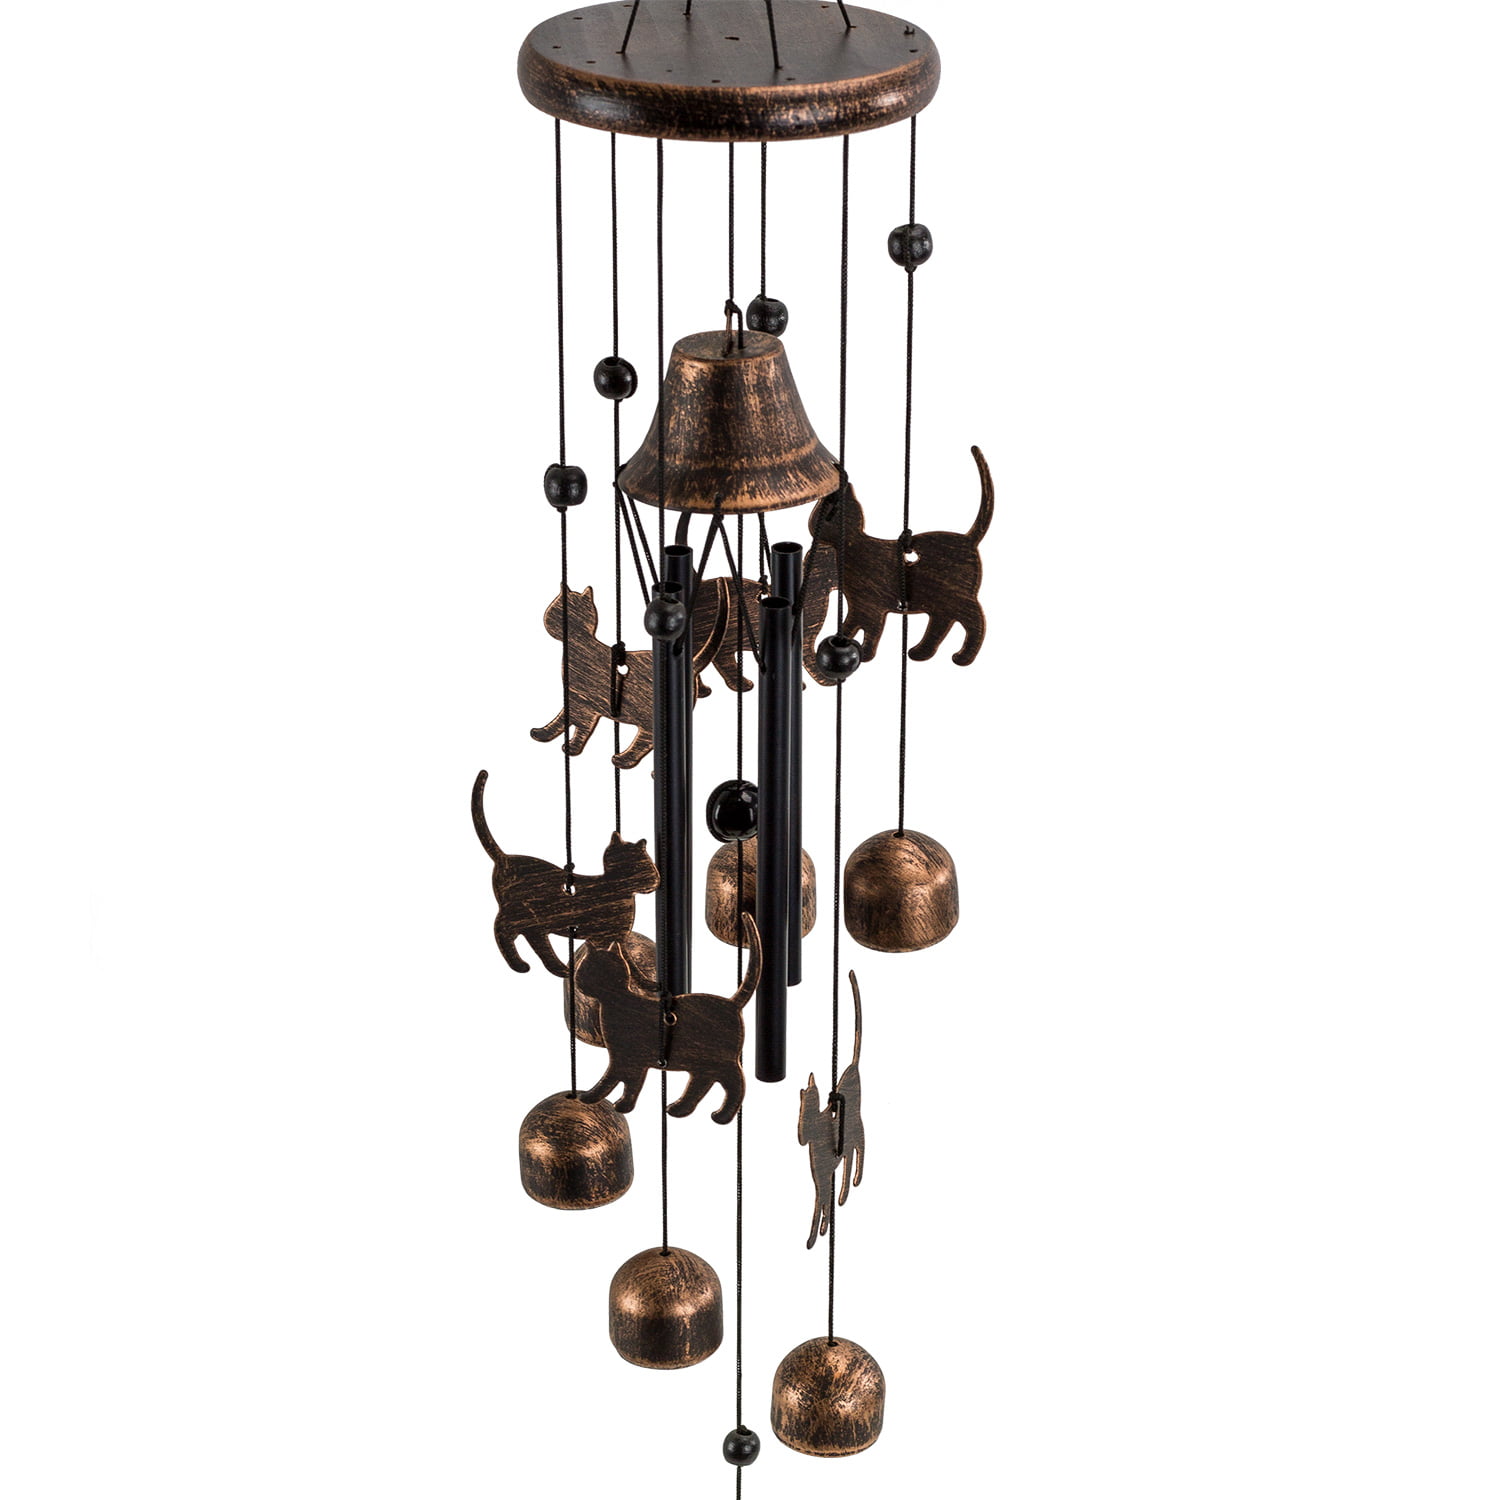 Dawhud Direct Cats Outdoor Garden Decor Wind Chime 